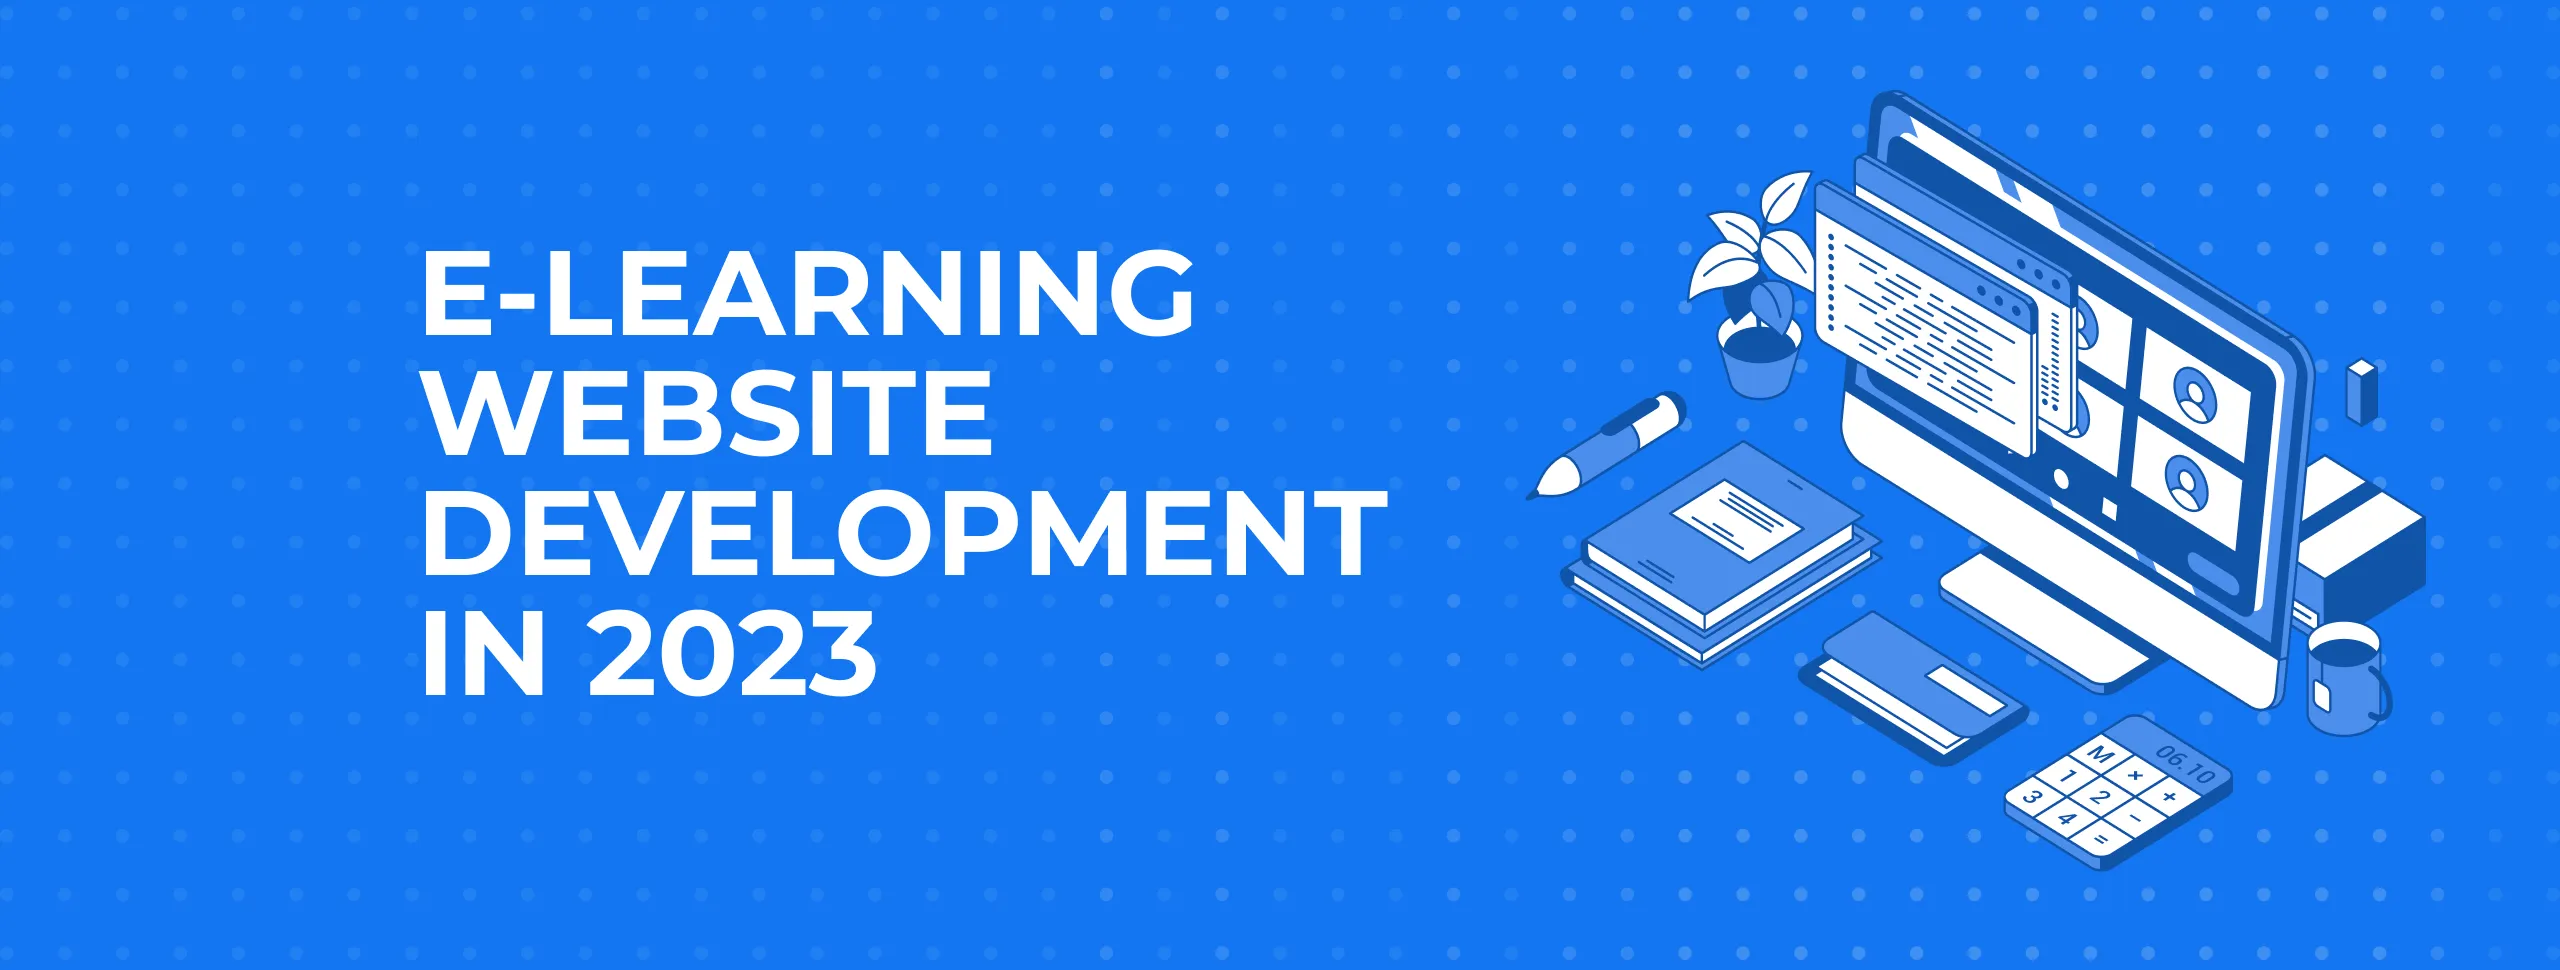 How to Create E-Learning Website in 2023